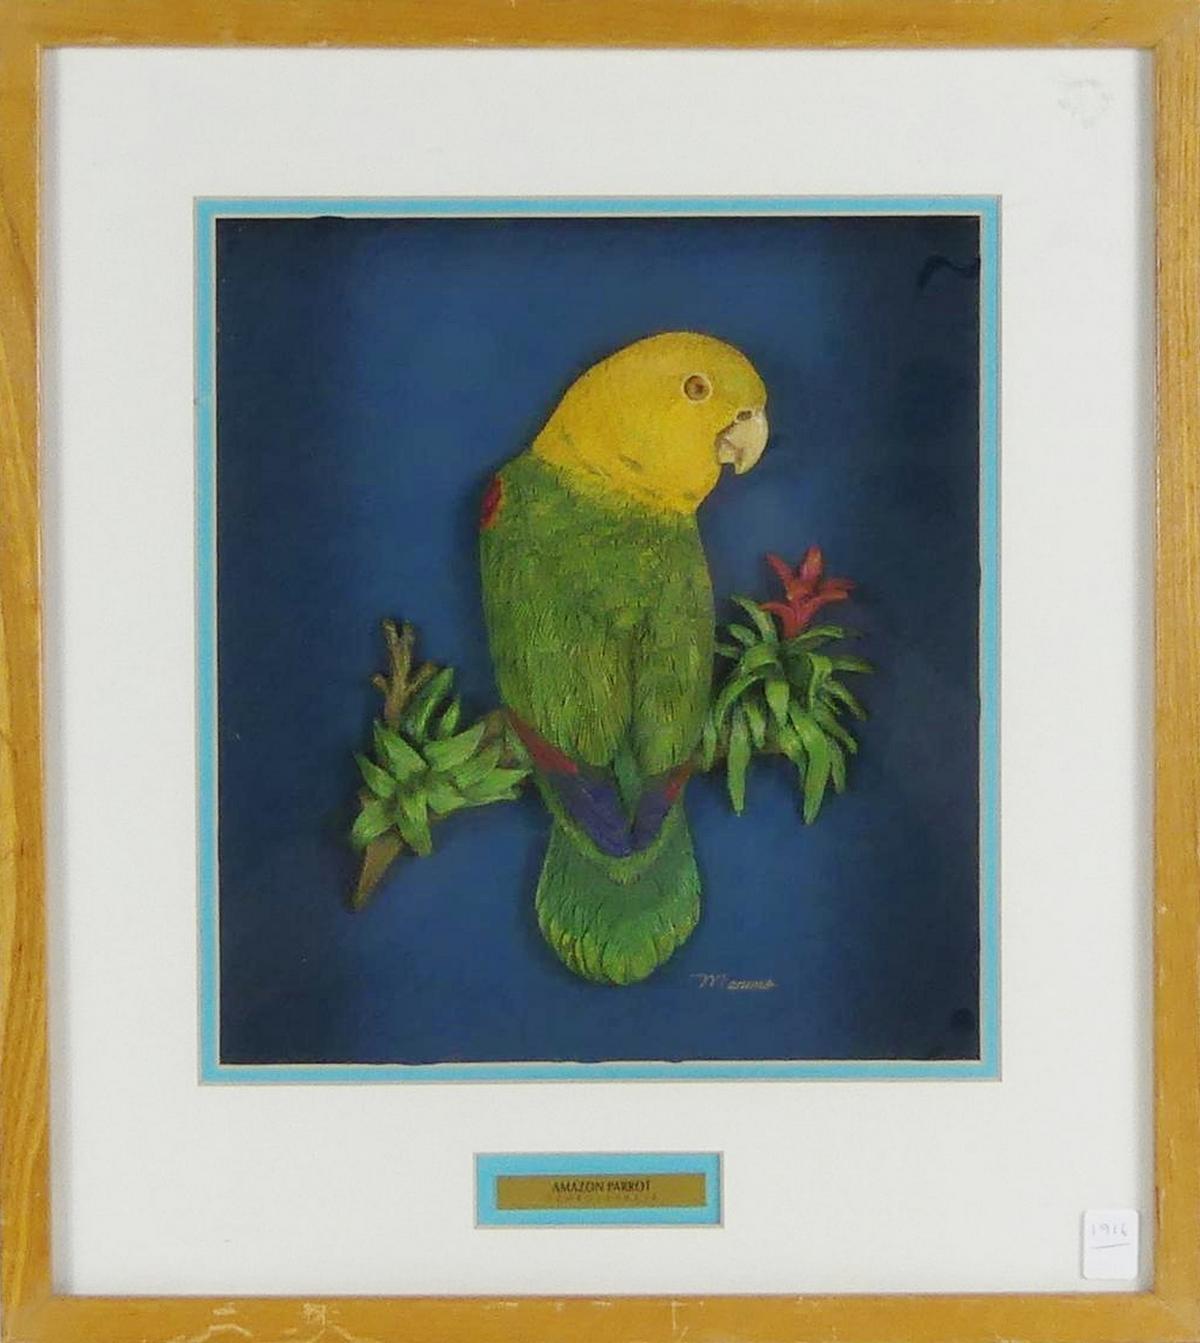 AMAZON PARROT IN SHADOWBOX